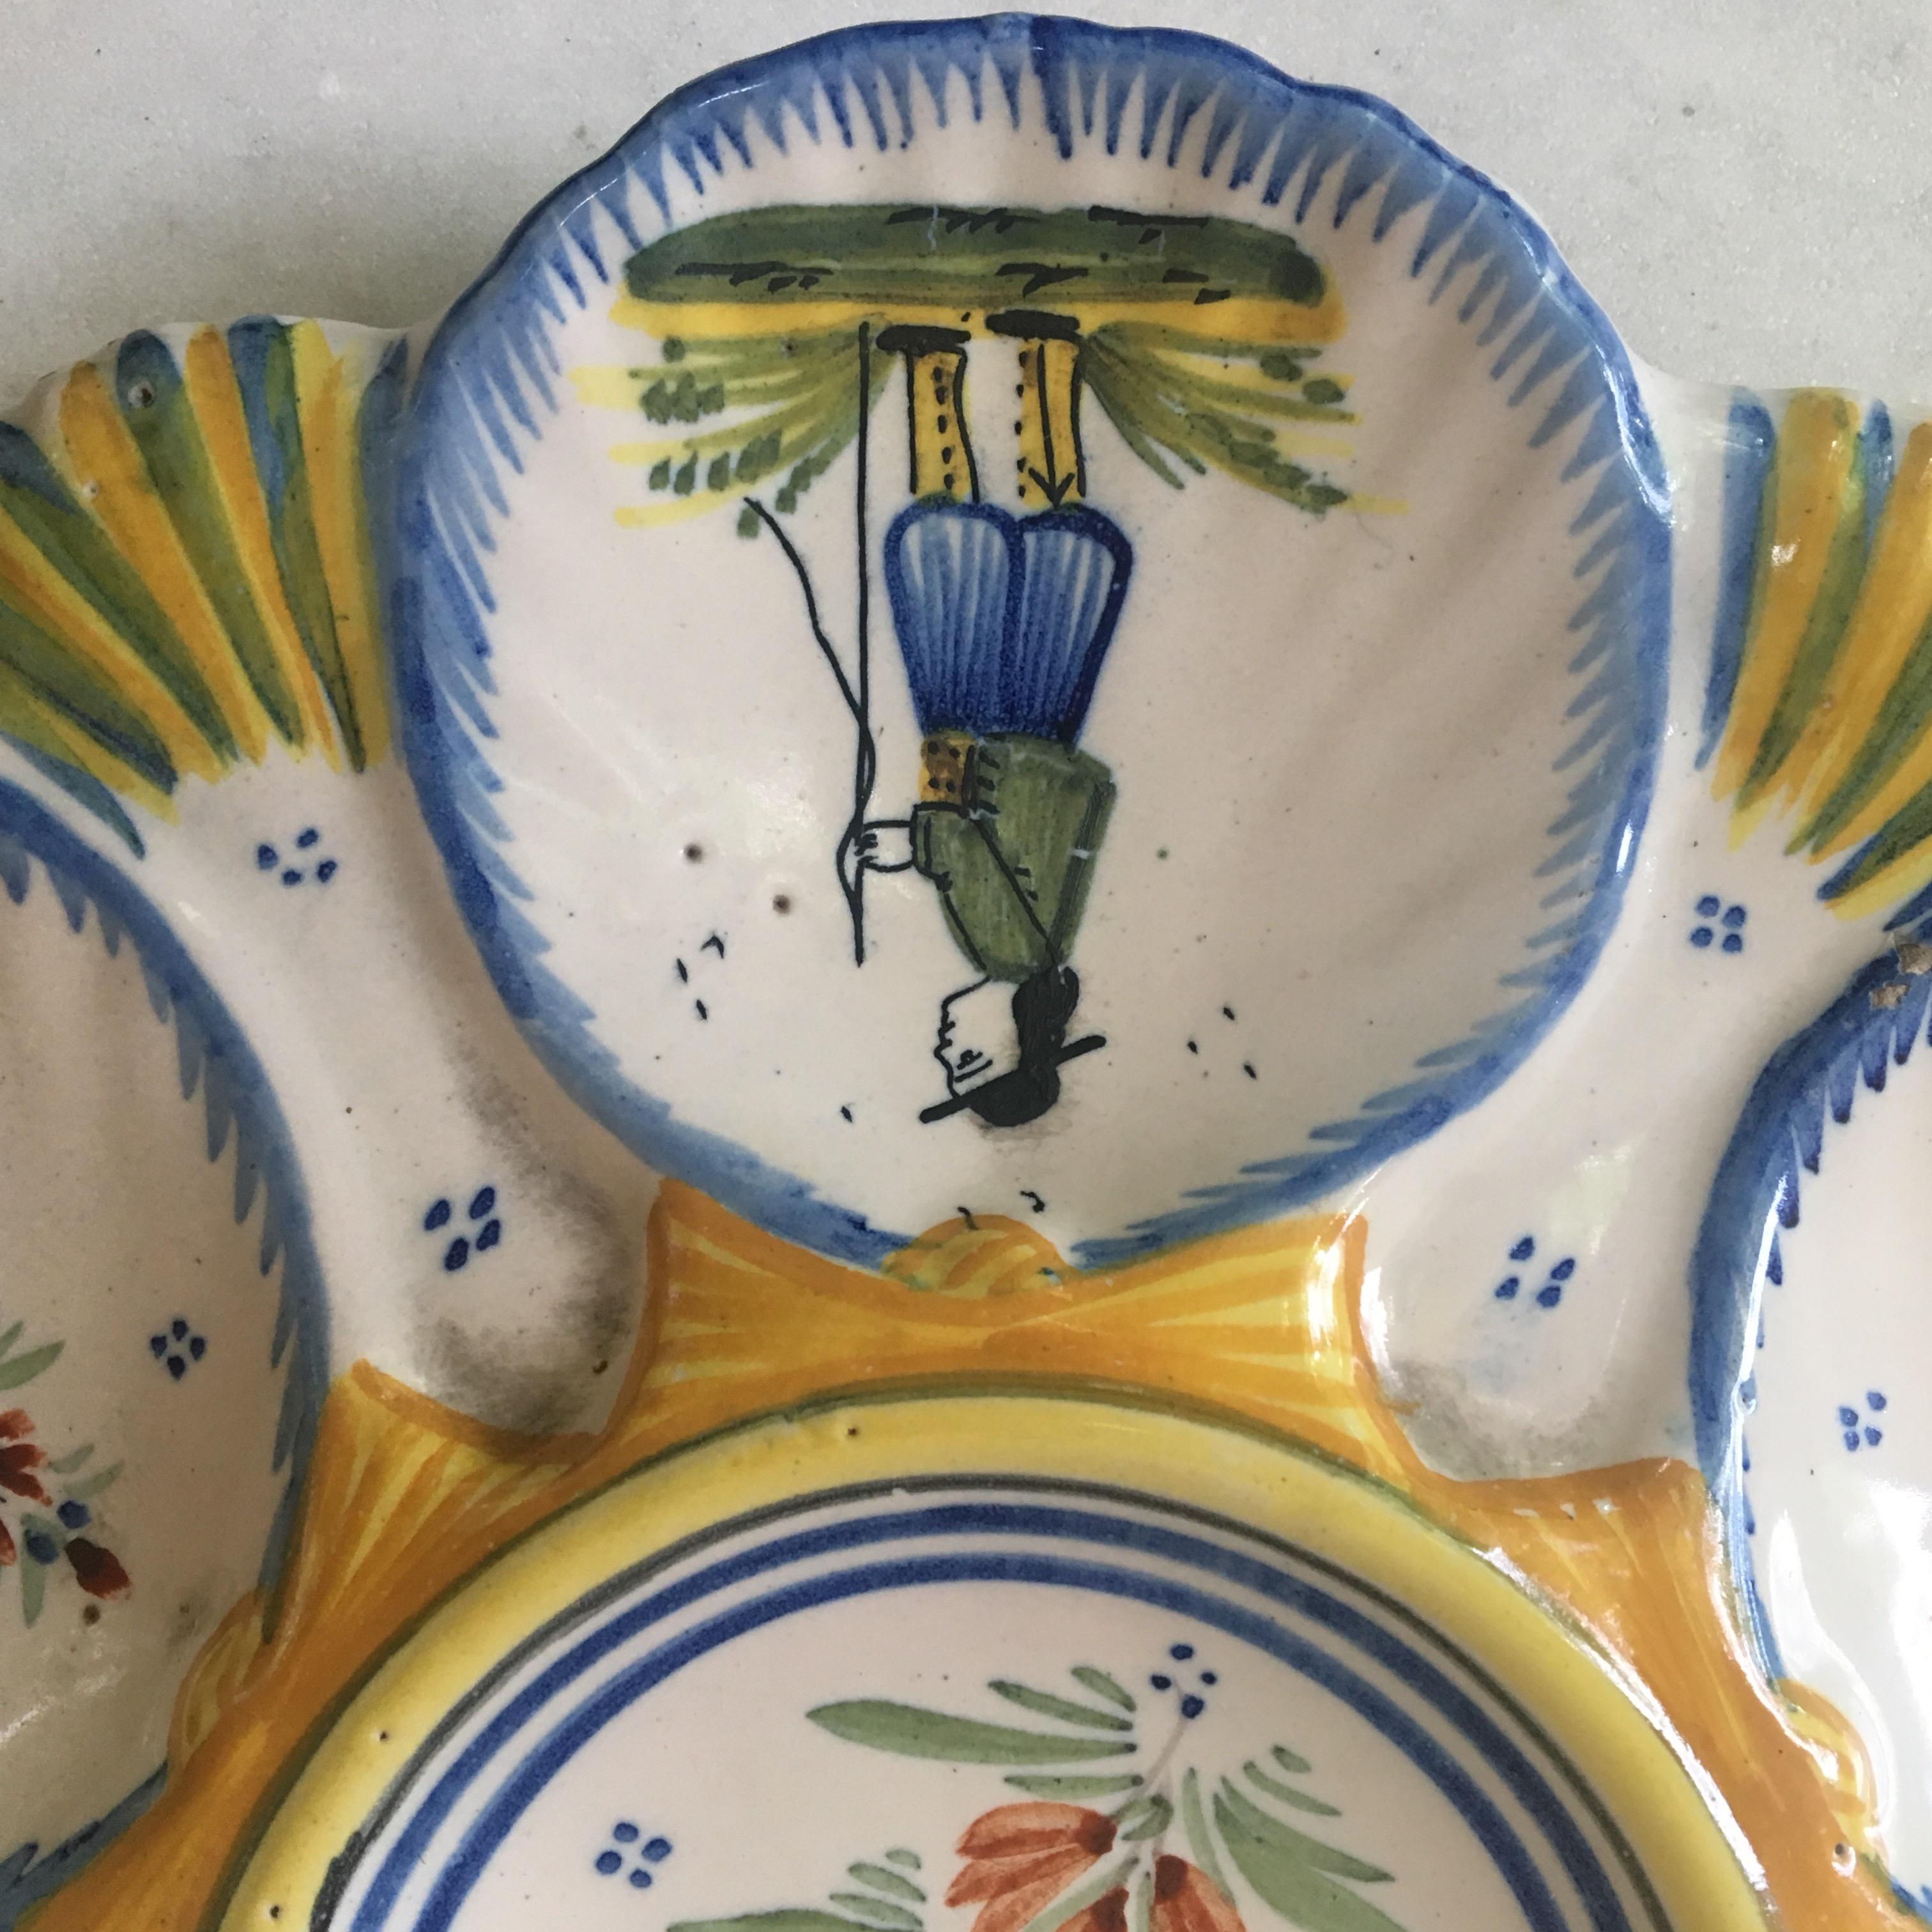 French faience oyster plate signed Henriot Quimper, circa 1904-1922.
Country style.
Decorated with field flowers and bretons.
